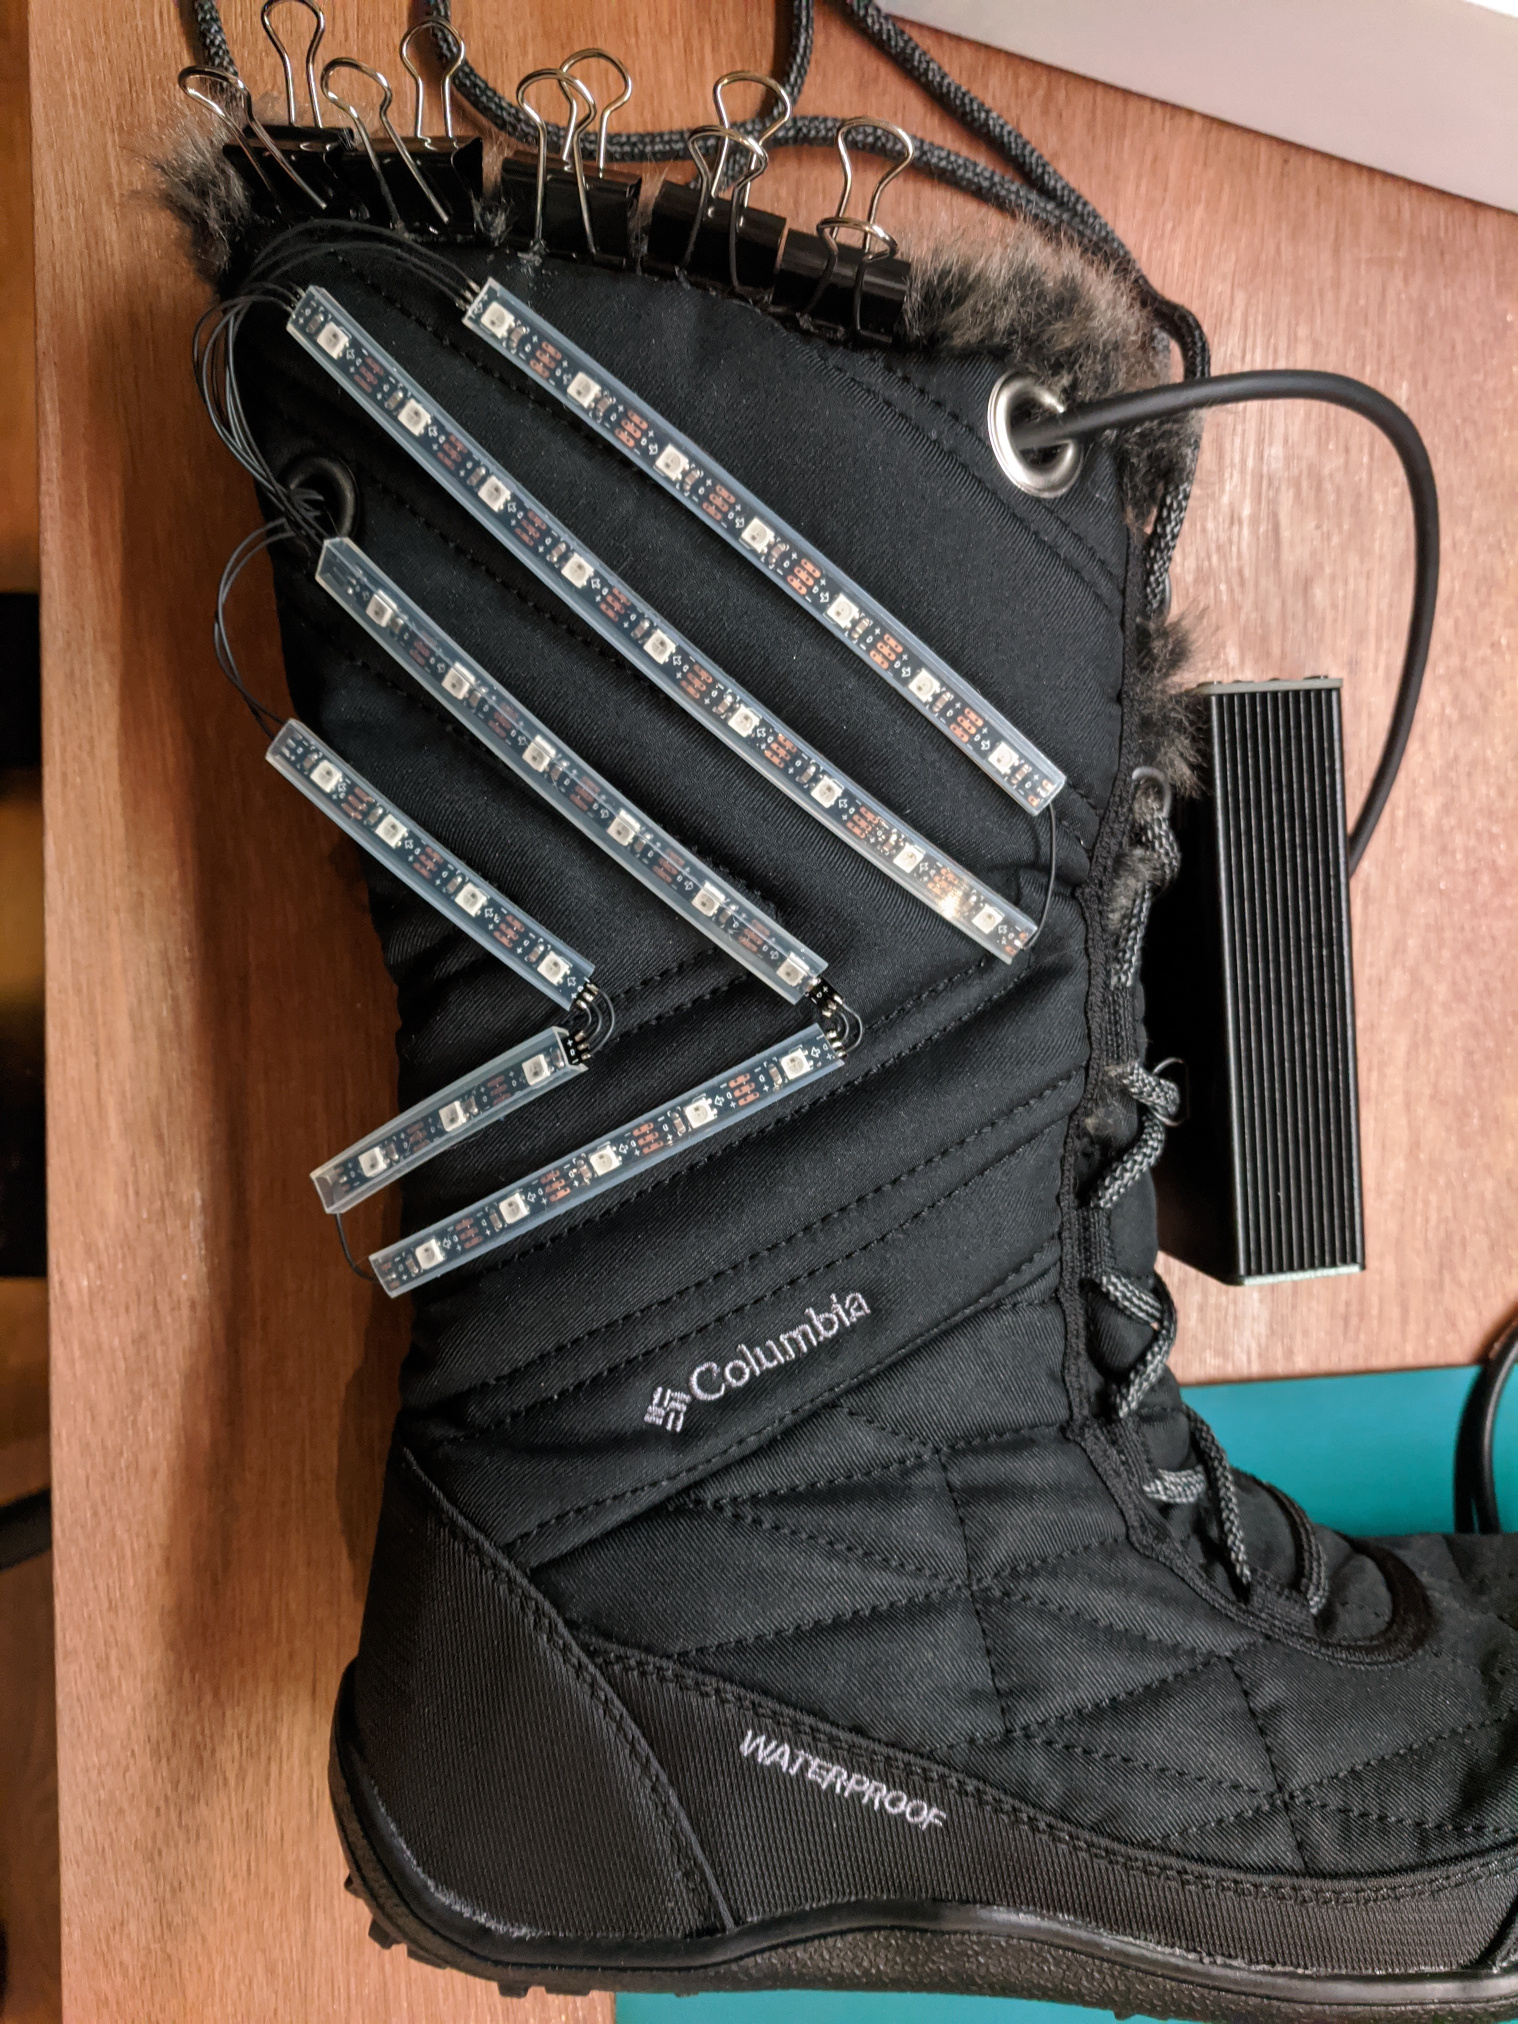 A boot, on its side, with LED strips laid out for mounting.